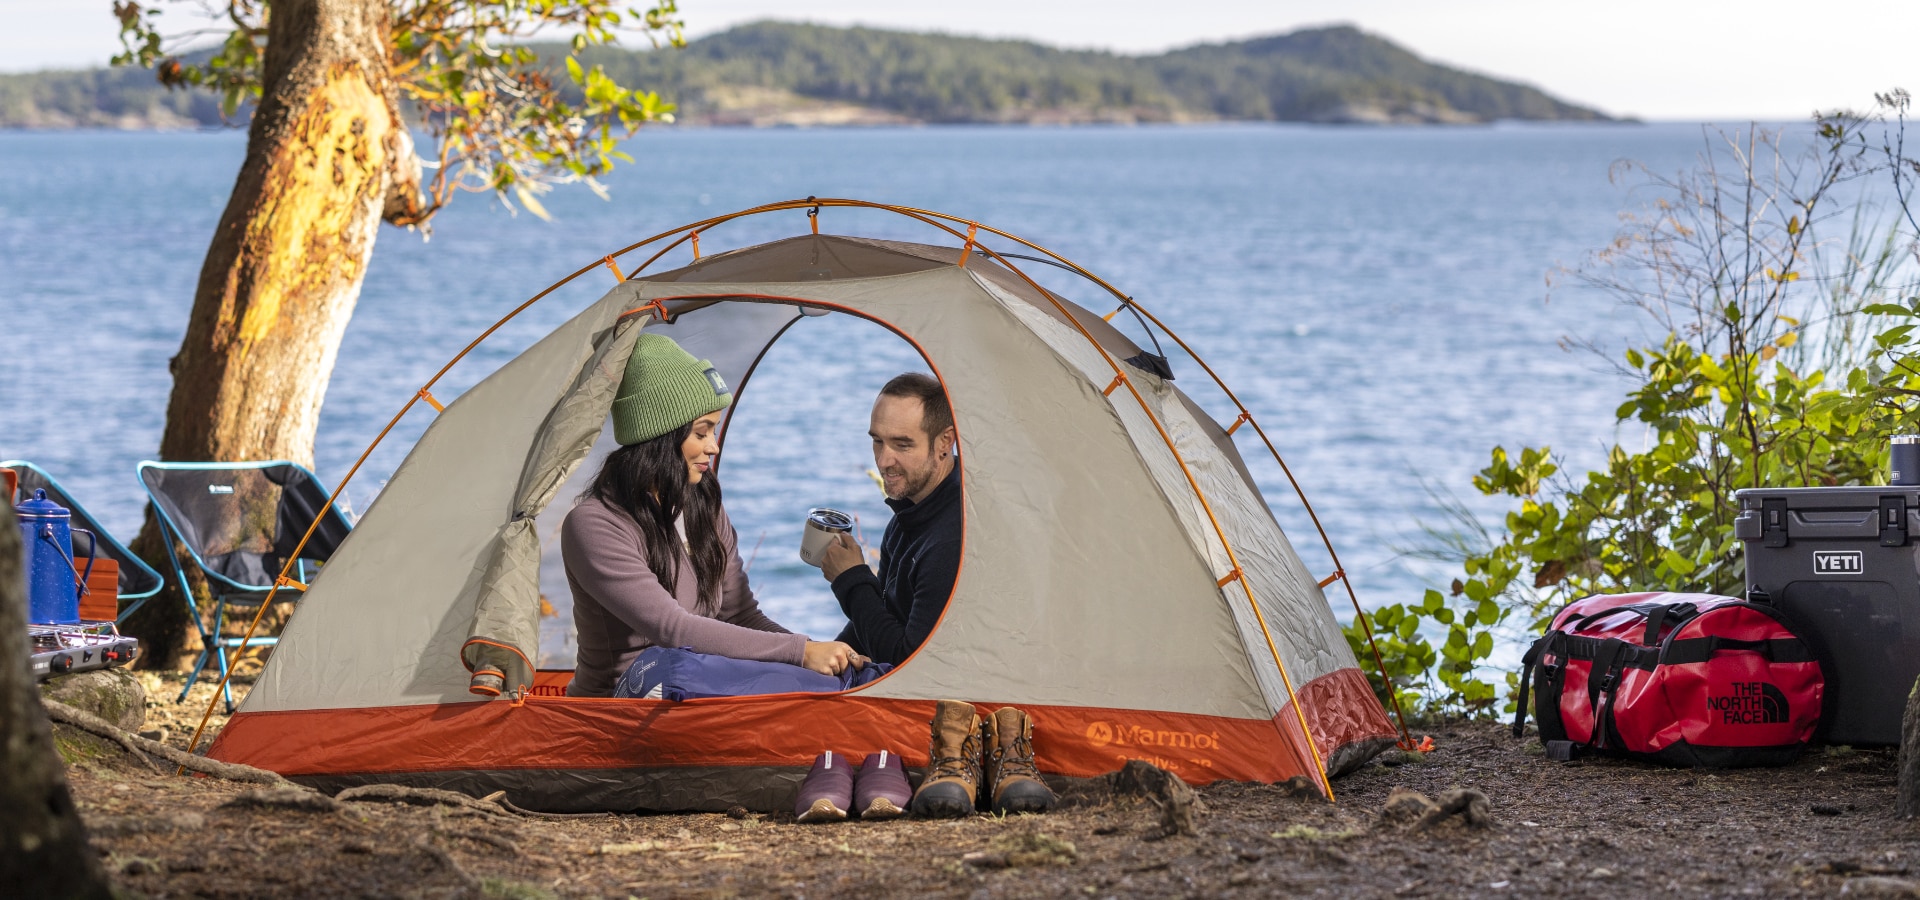 Shop the Camping Gear Guide